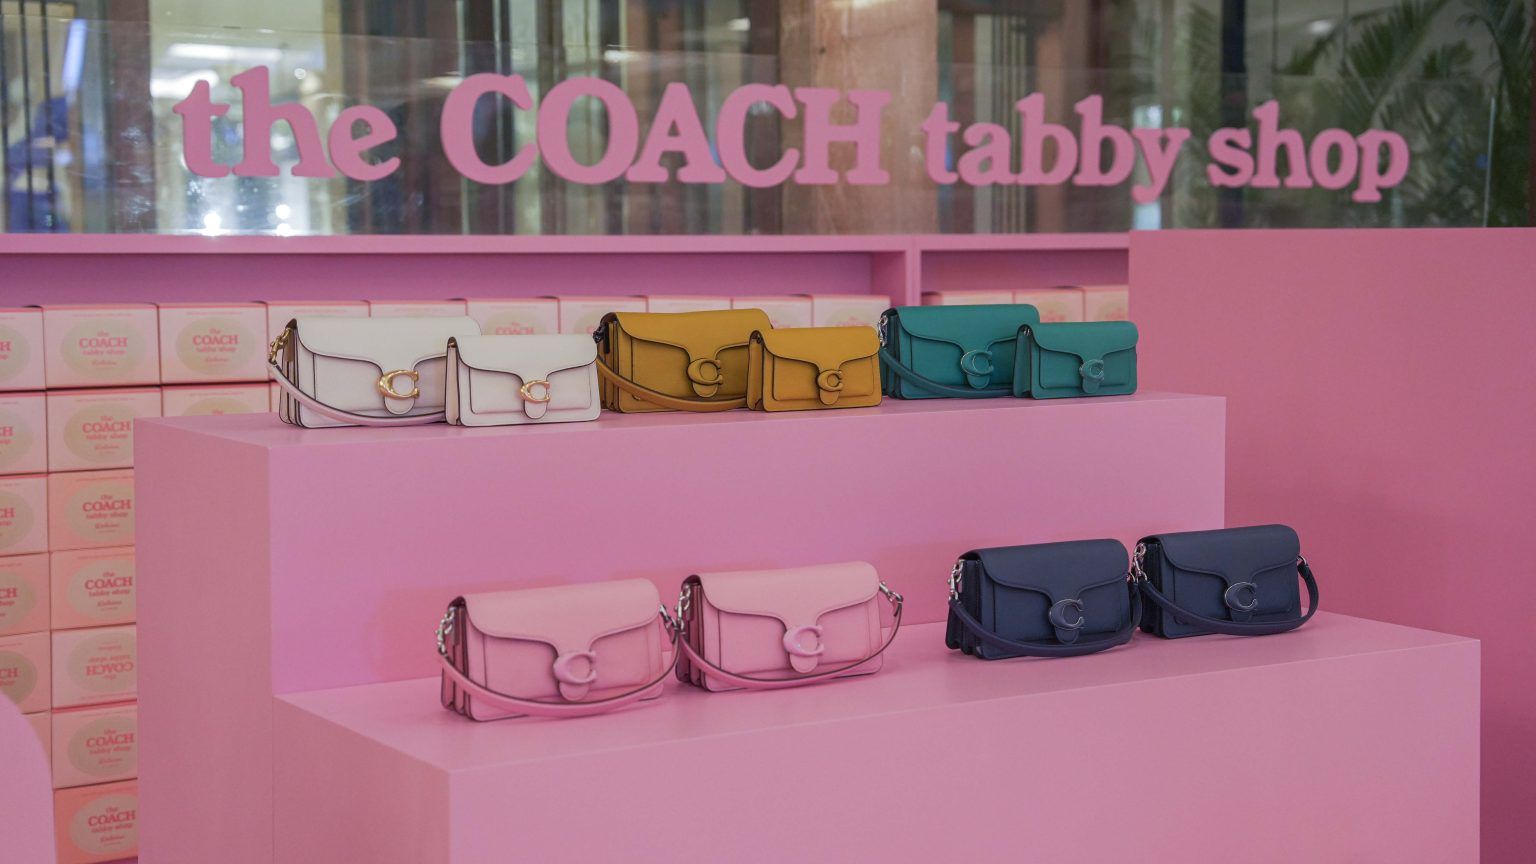 An ice cream pop up to celebrate the Coach Tabby bag